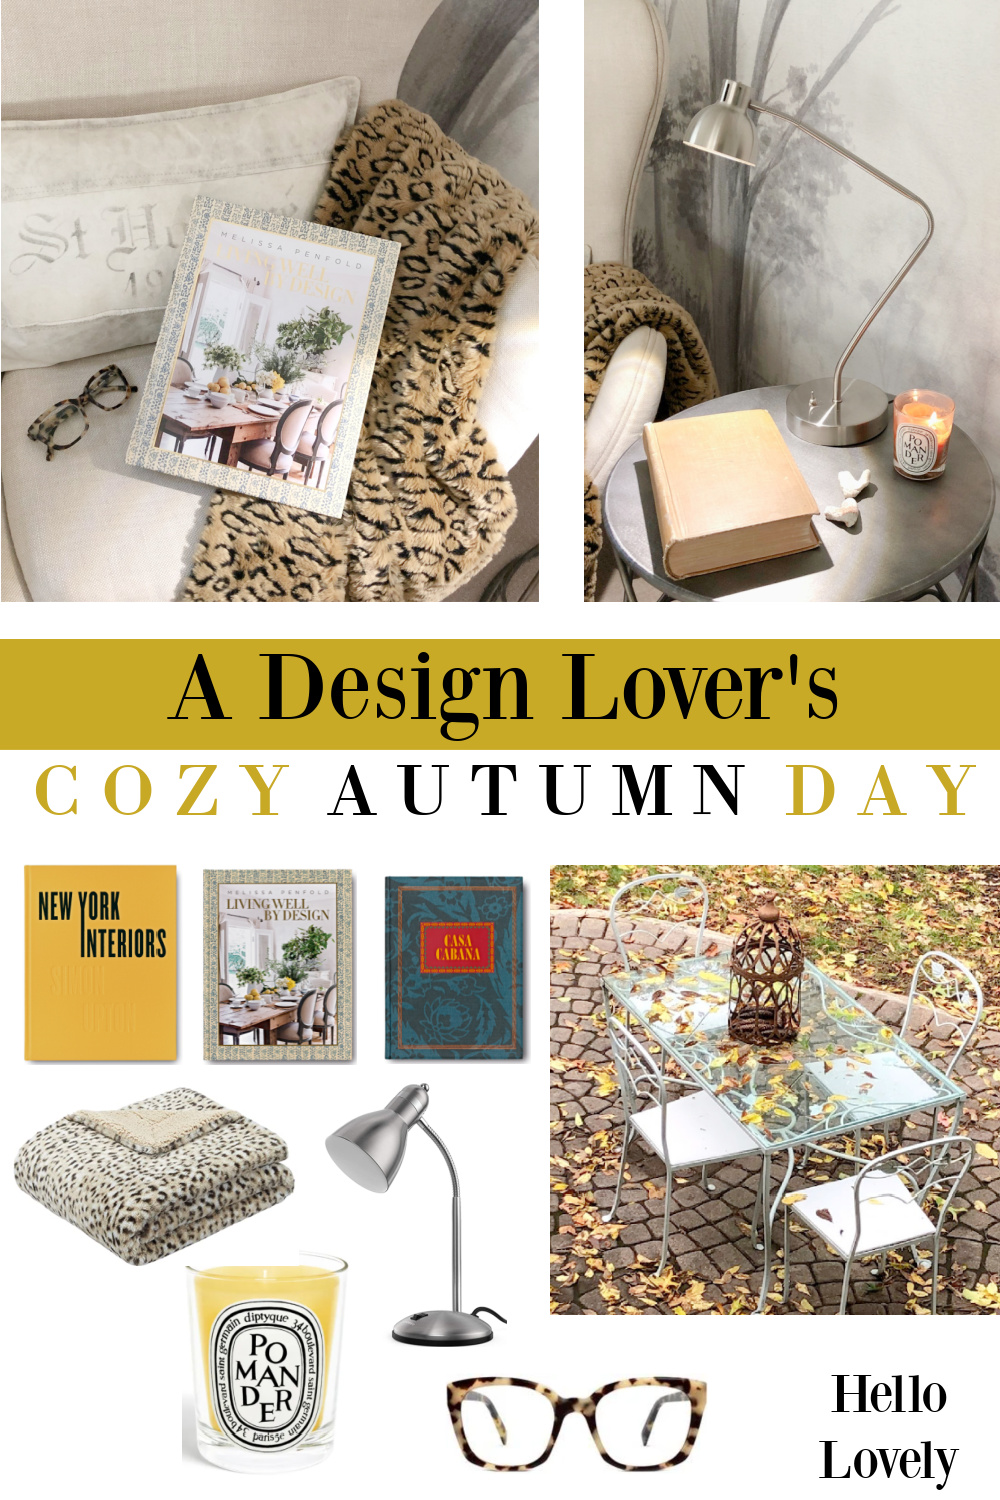 A Design Lover's Cozy Autumn Day - check out these gorgeous books and finds for a stay at home self-care moment! Hello Lovely Studio.